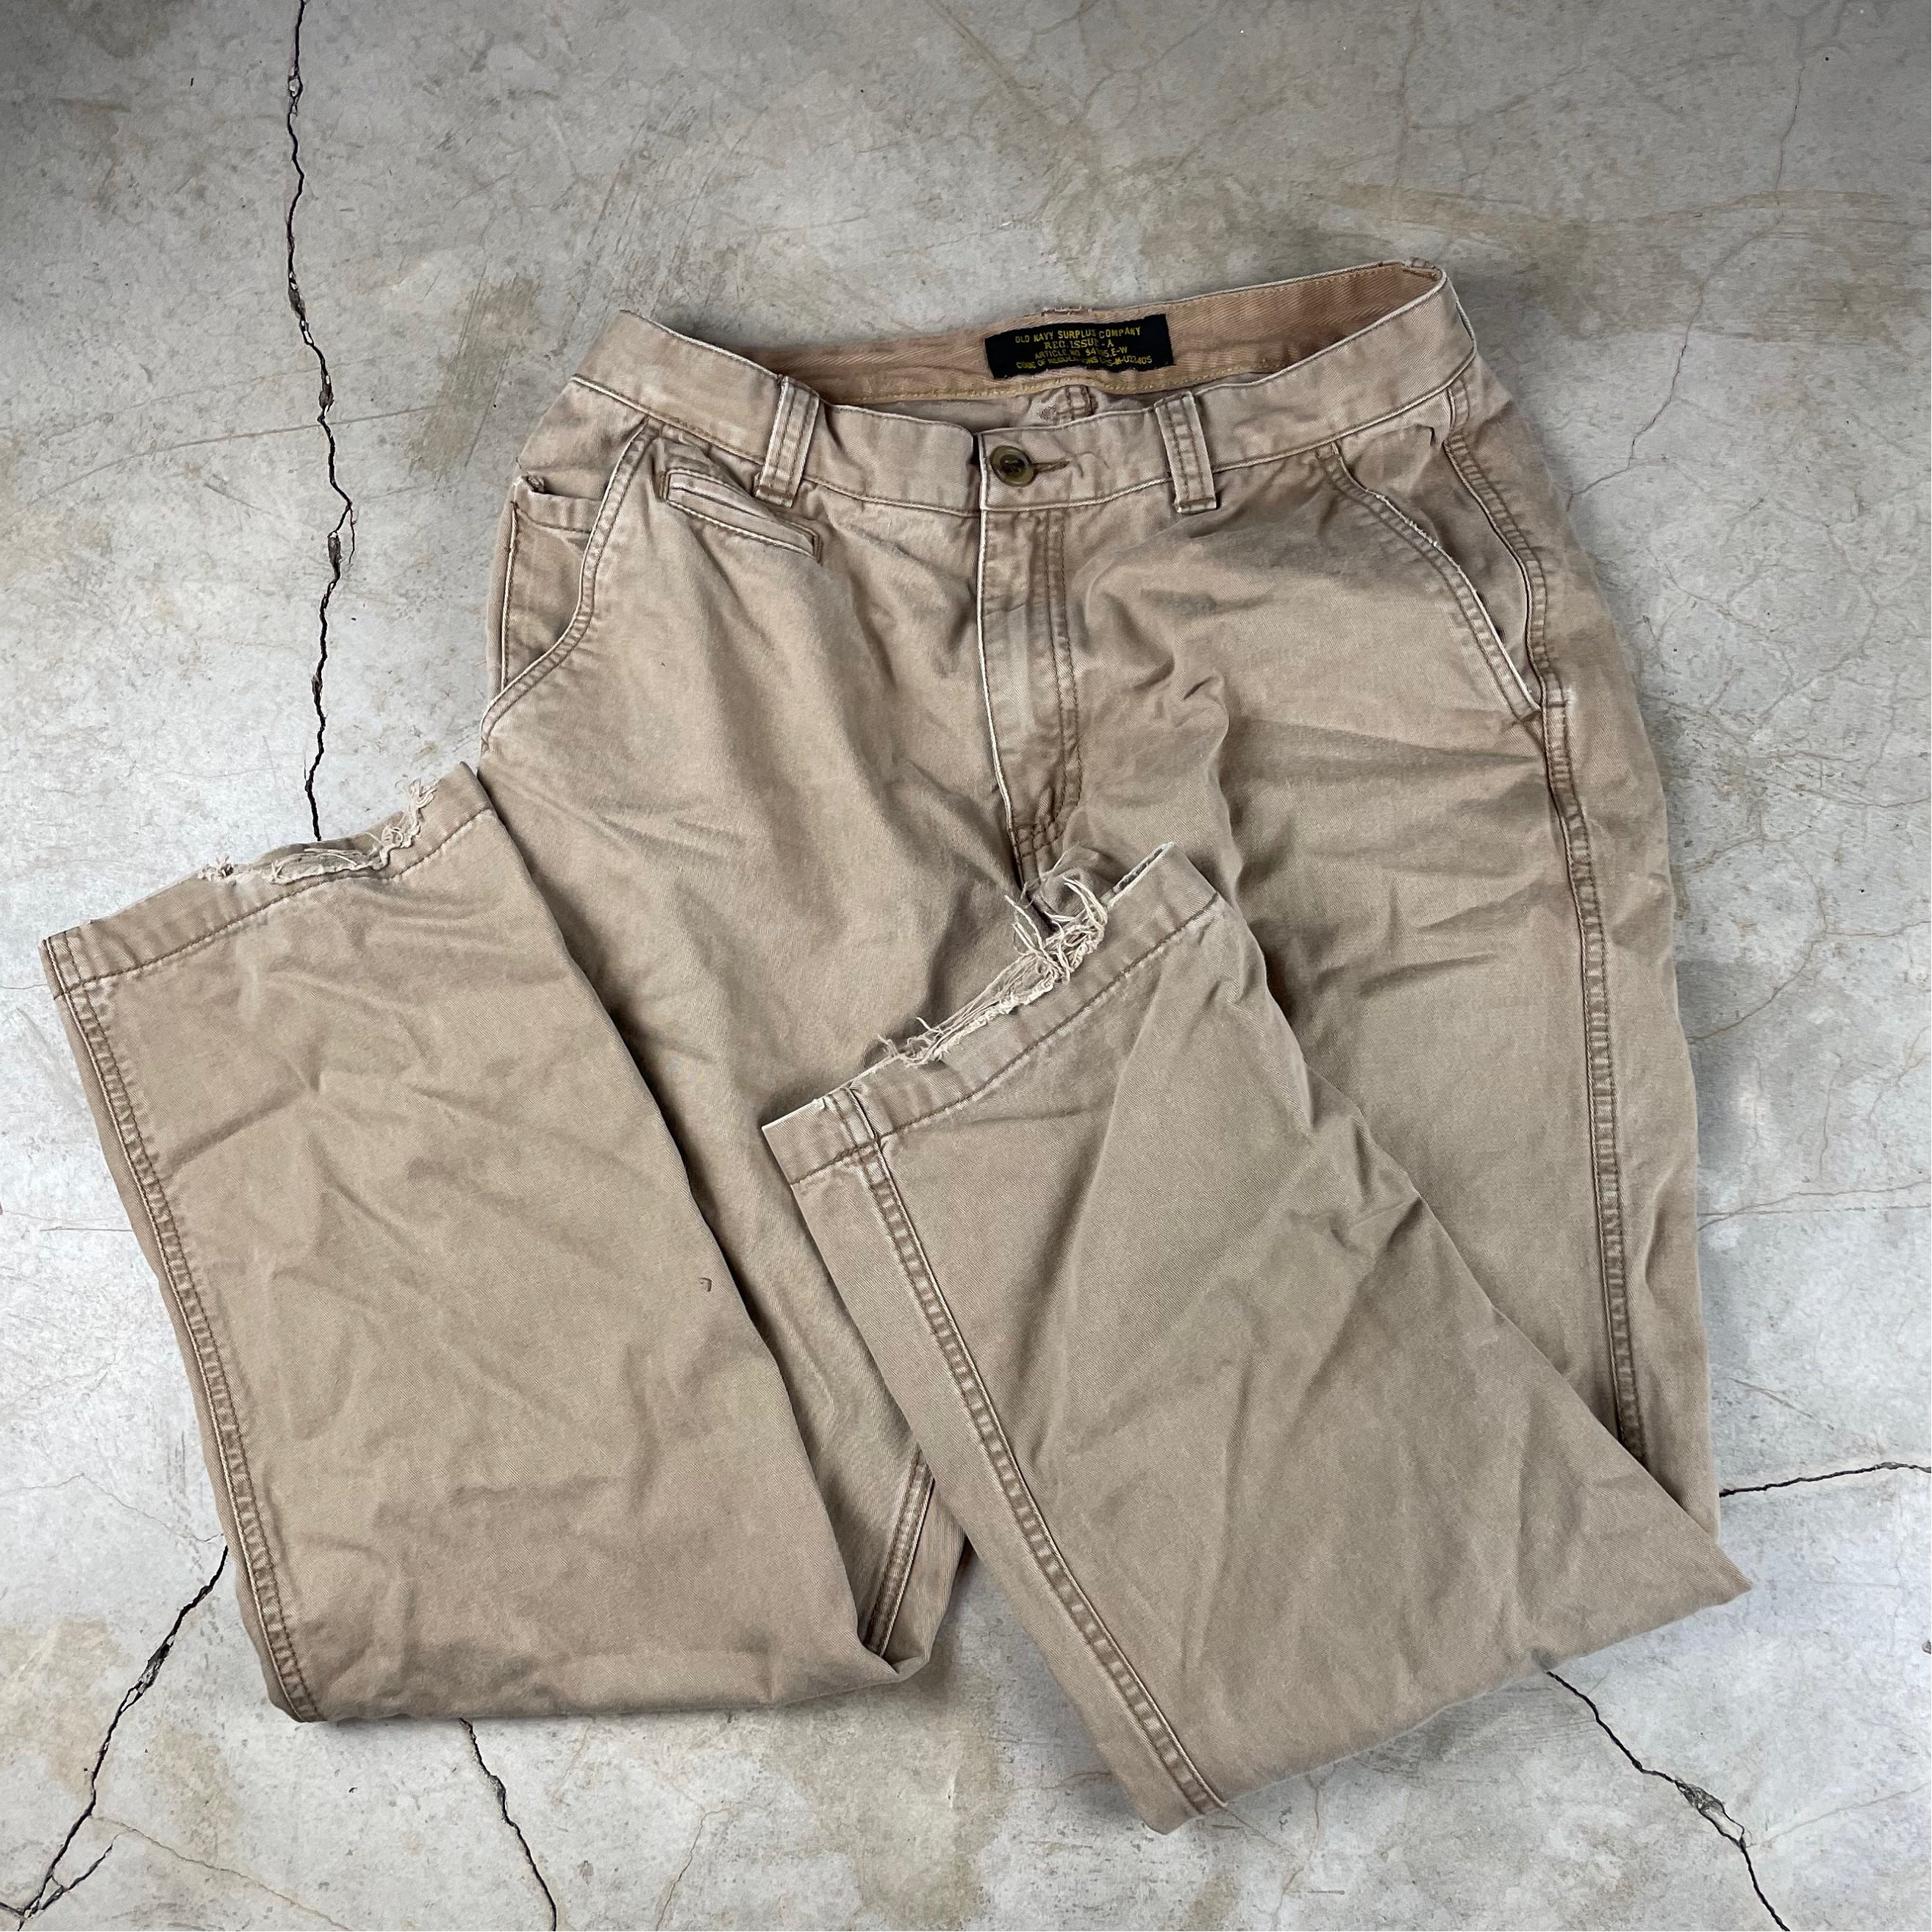 In Review The Old Navy Slim BuiltIn Flex Dry Quick Ultimate Khakis